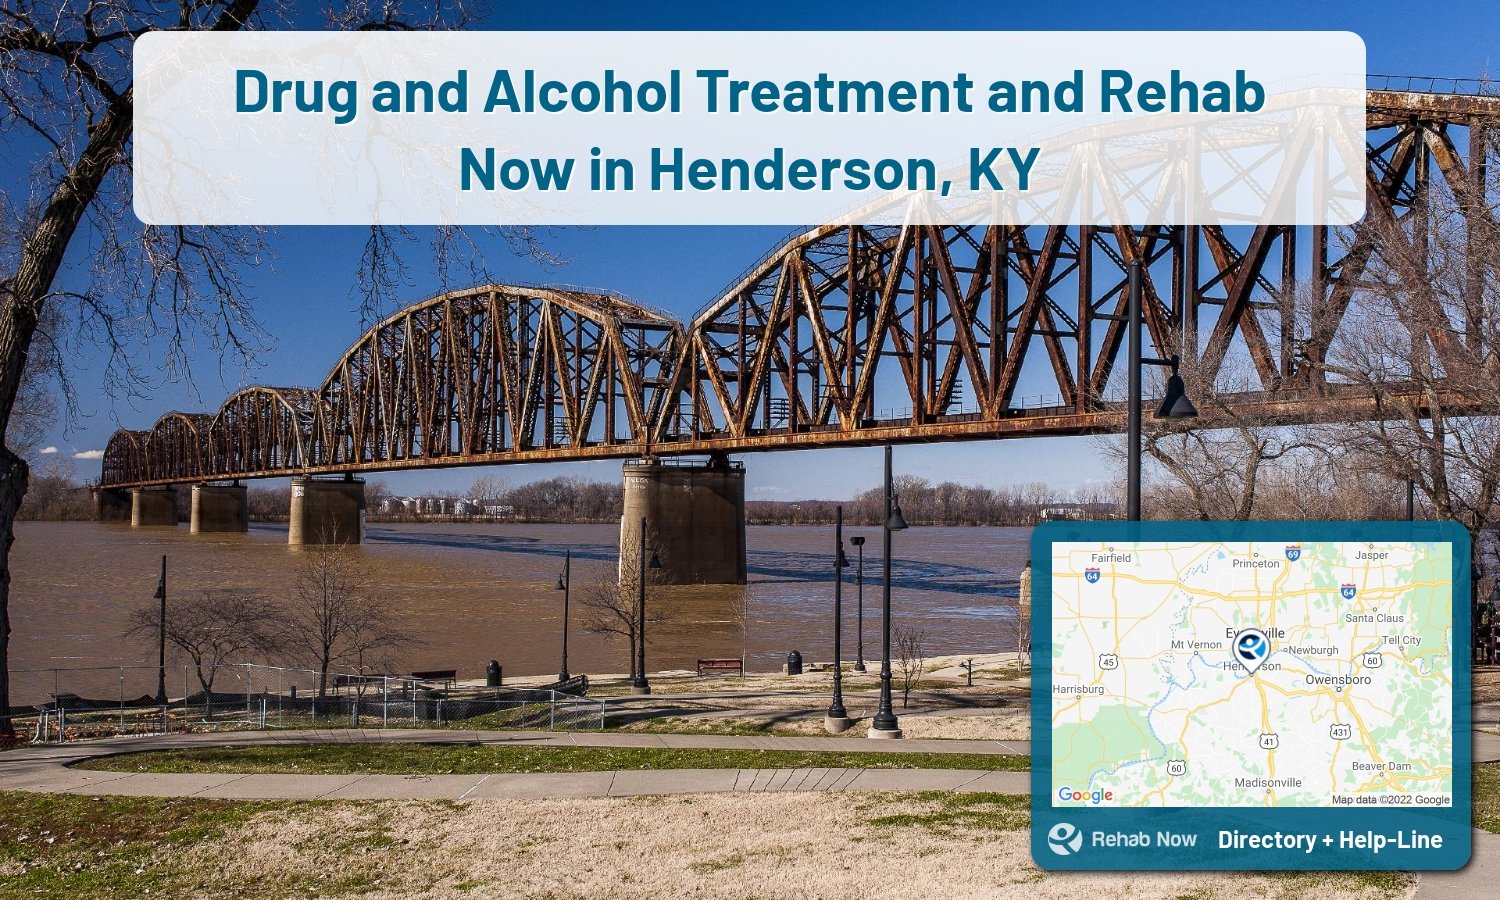 Our experts can help you find treatment now in Henderson, Kentucky. We list drug rehab and alcohol centers in Kentucky.